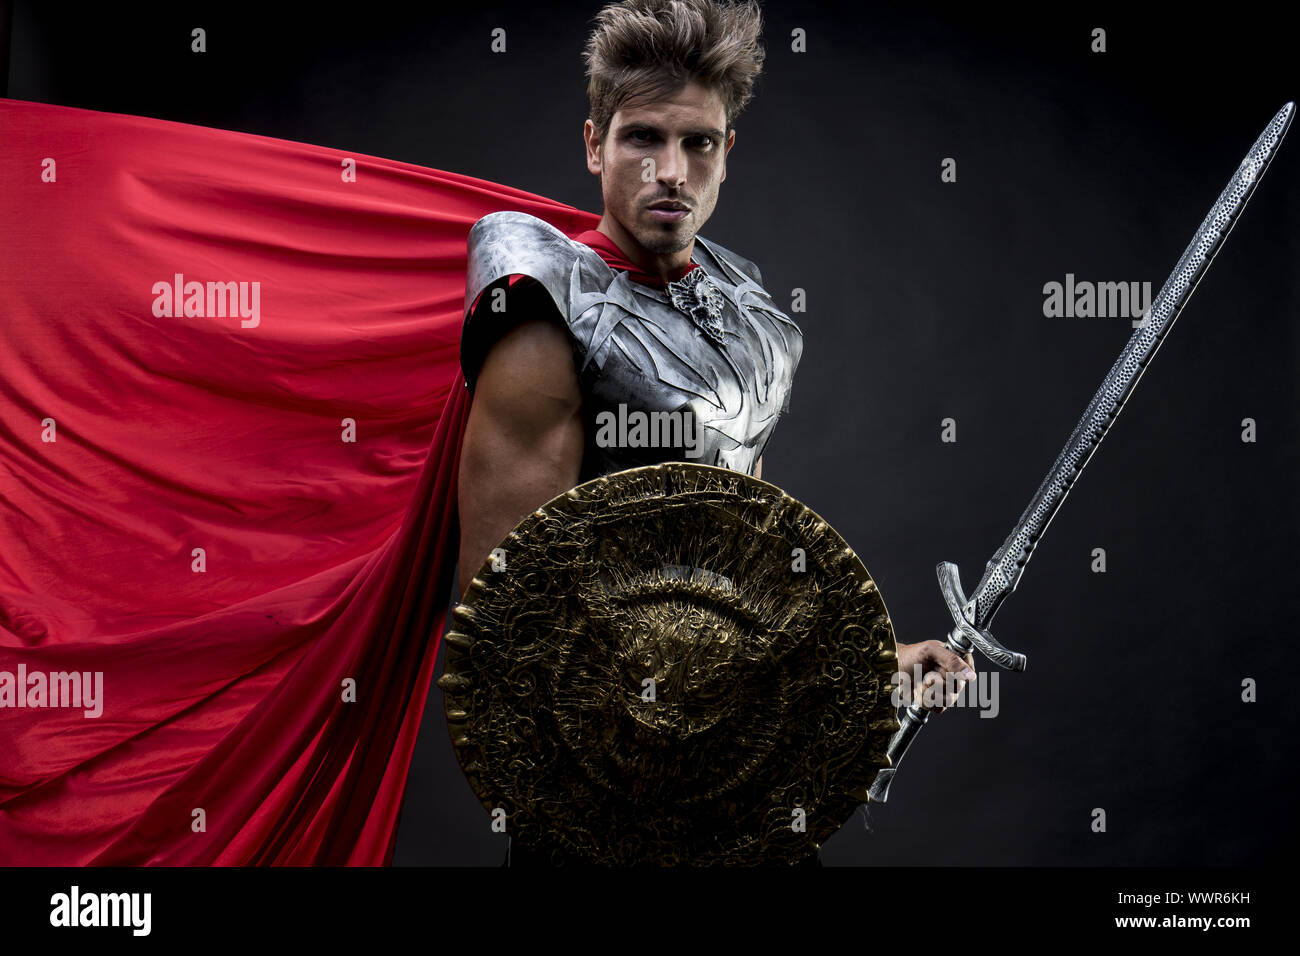 Power, centurion or Roman warrior with iron armor, military helmet with horsehair and sword Stock Photo